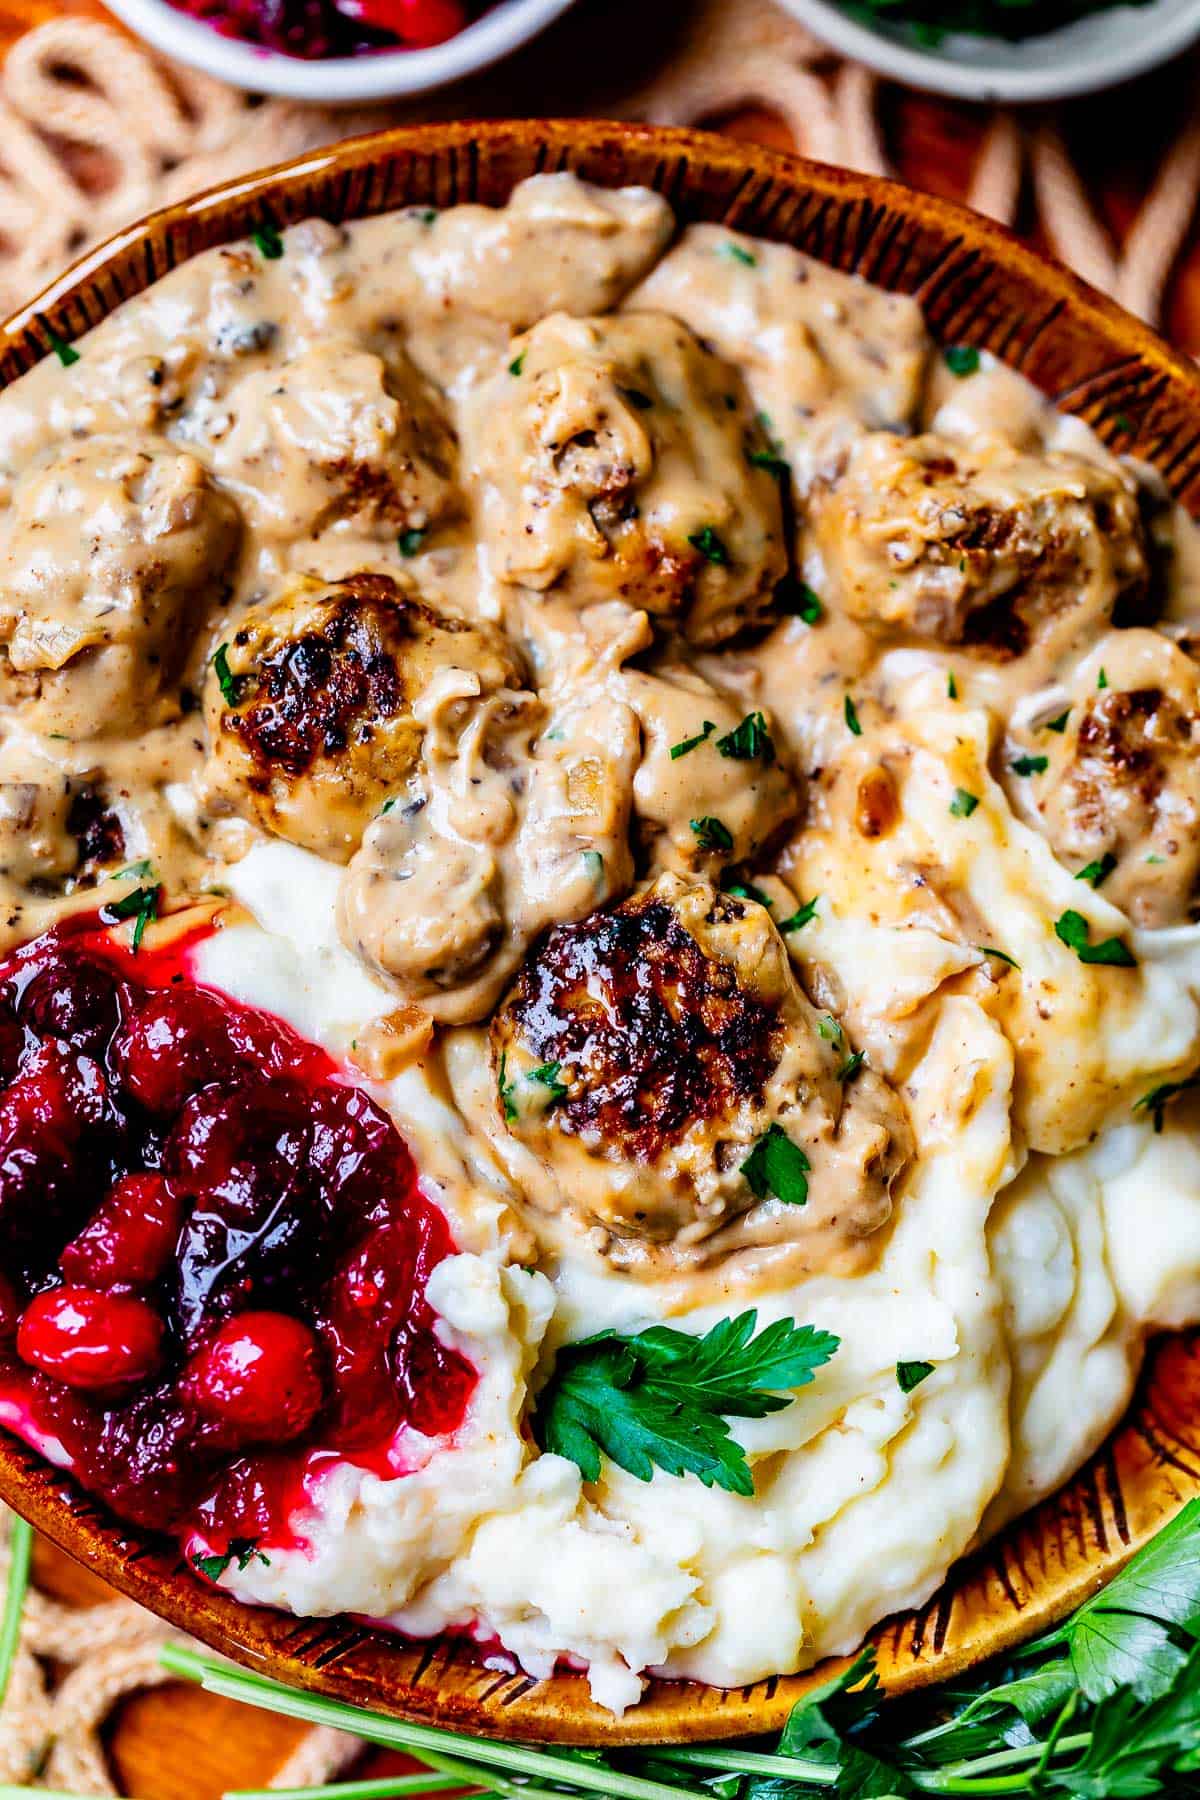 a bowl filled with mashed potatoes, swedish meatballs in sauce, and cranberry sauce.